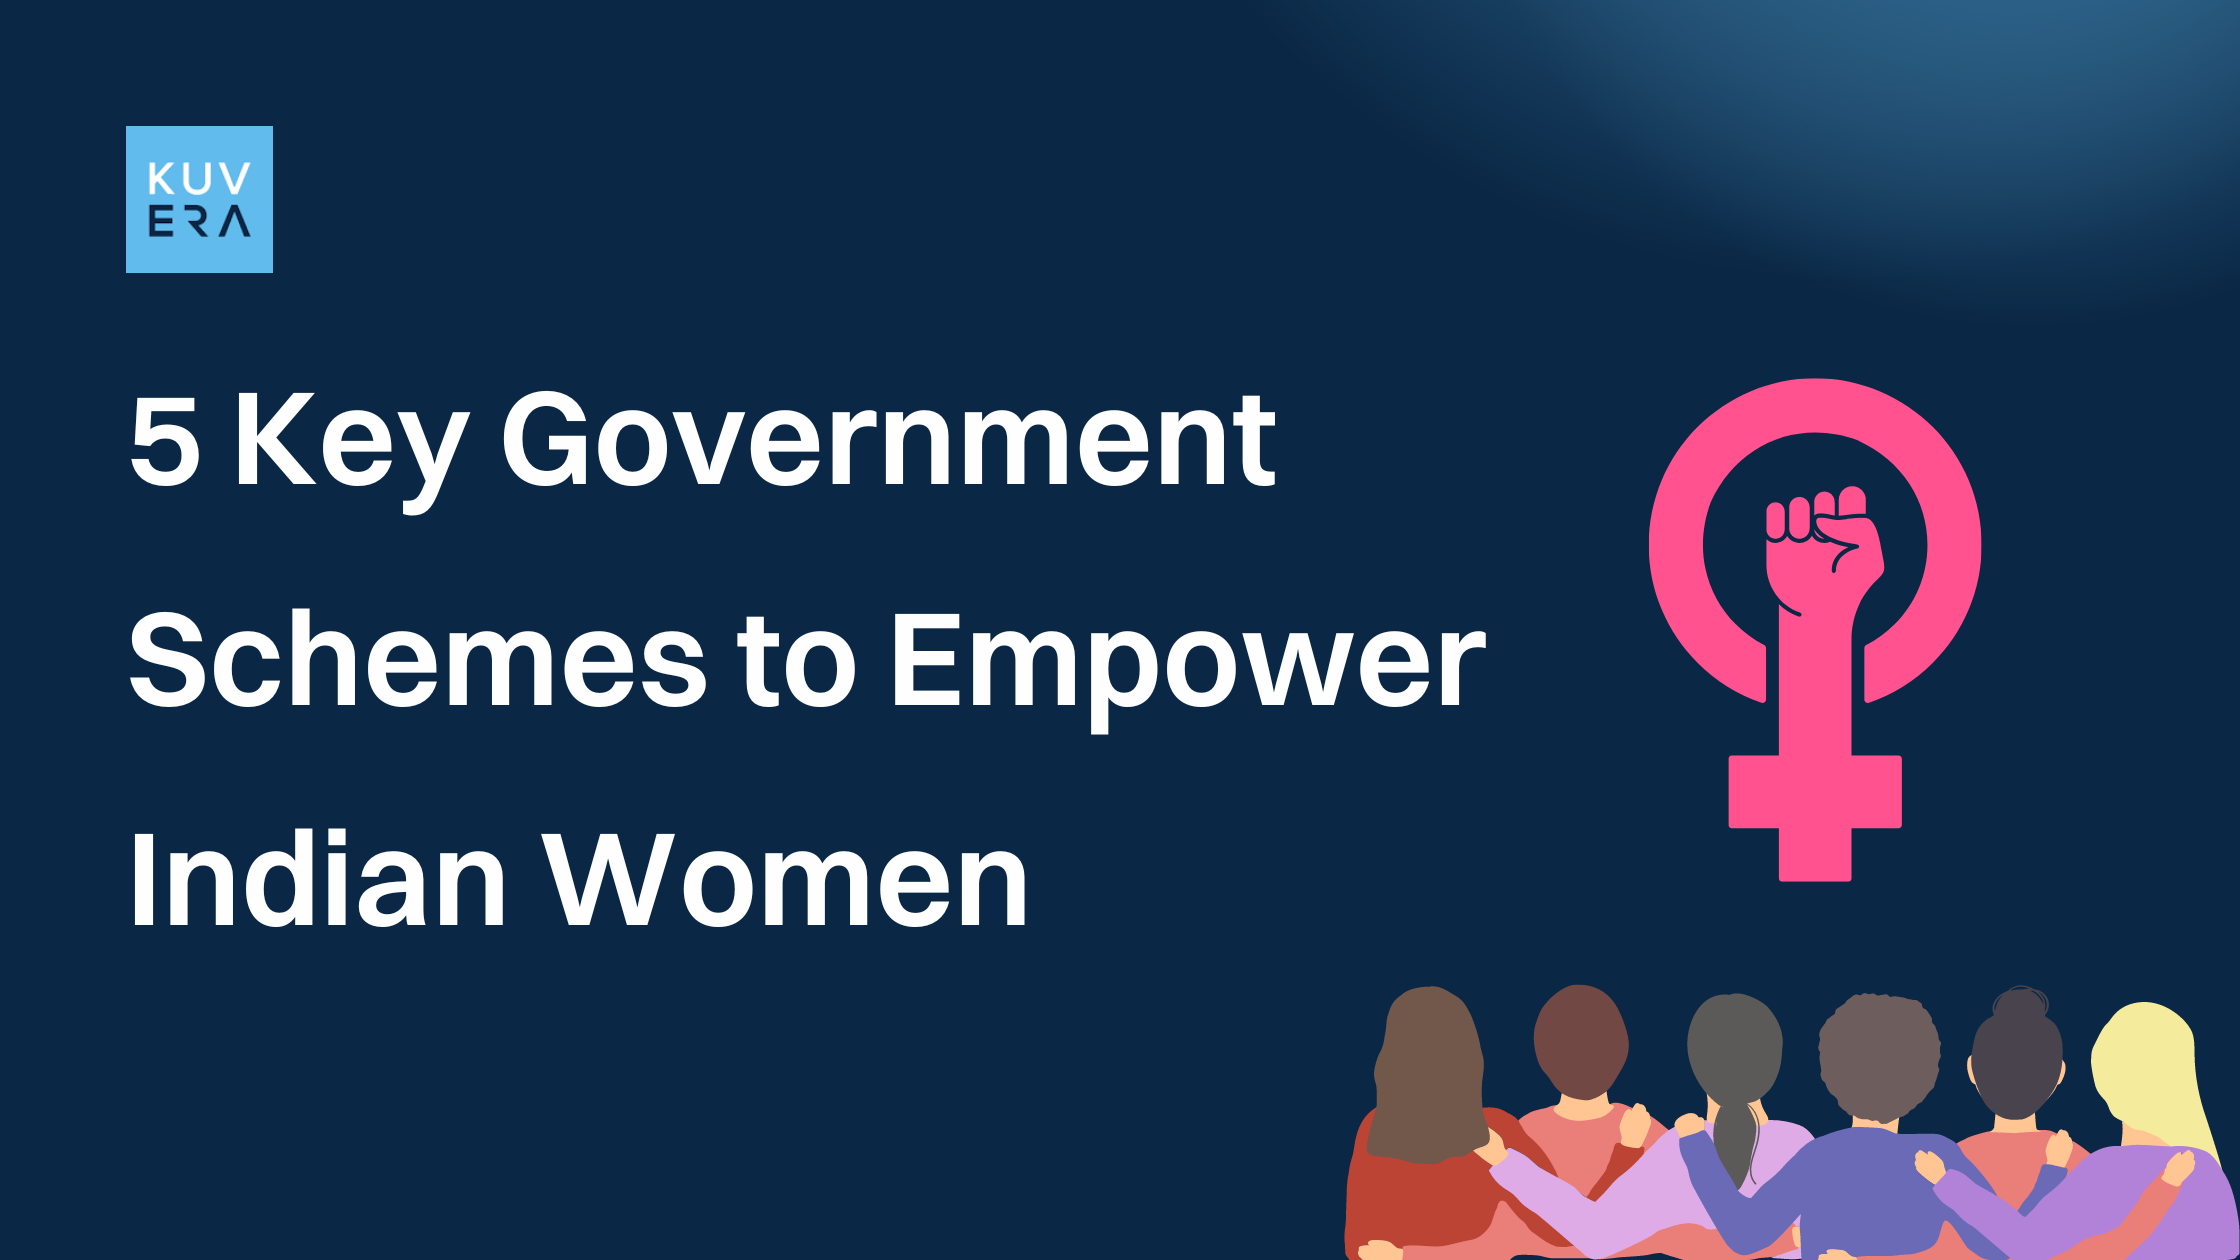 5 Key Government Schemes to Empower Indian Women